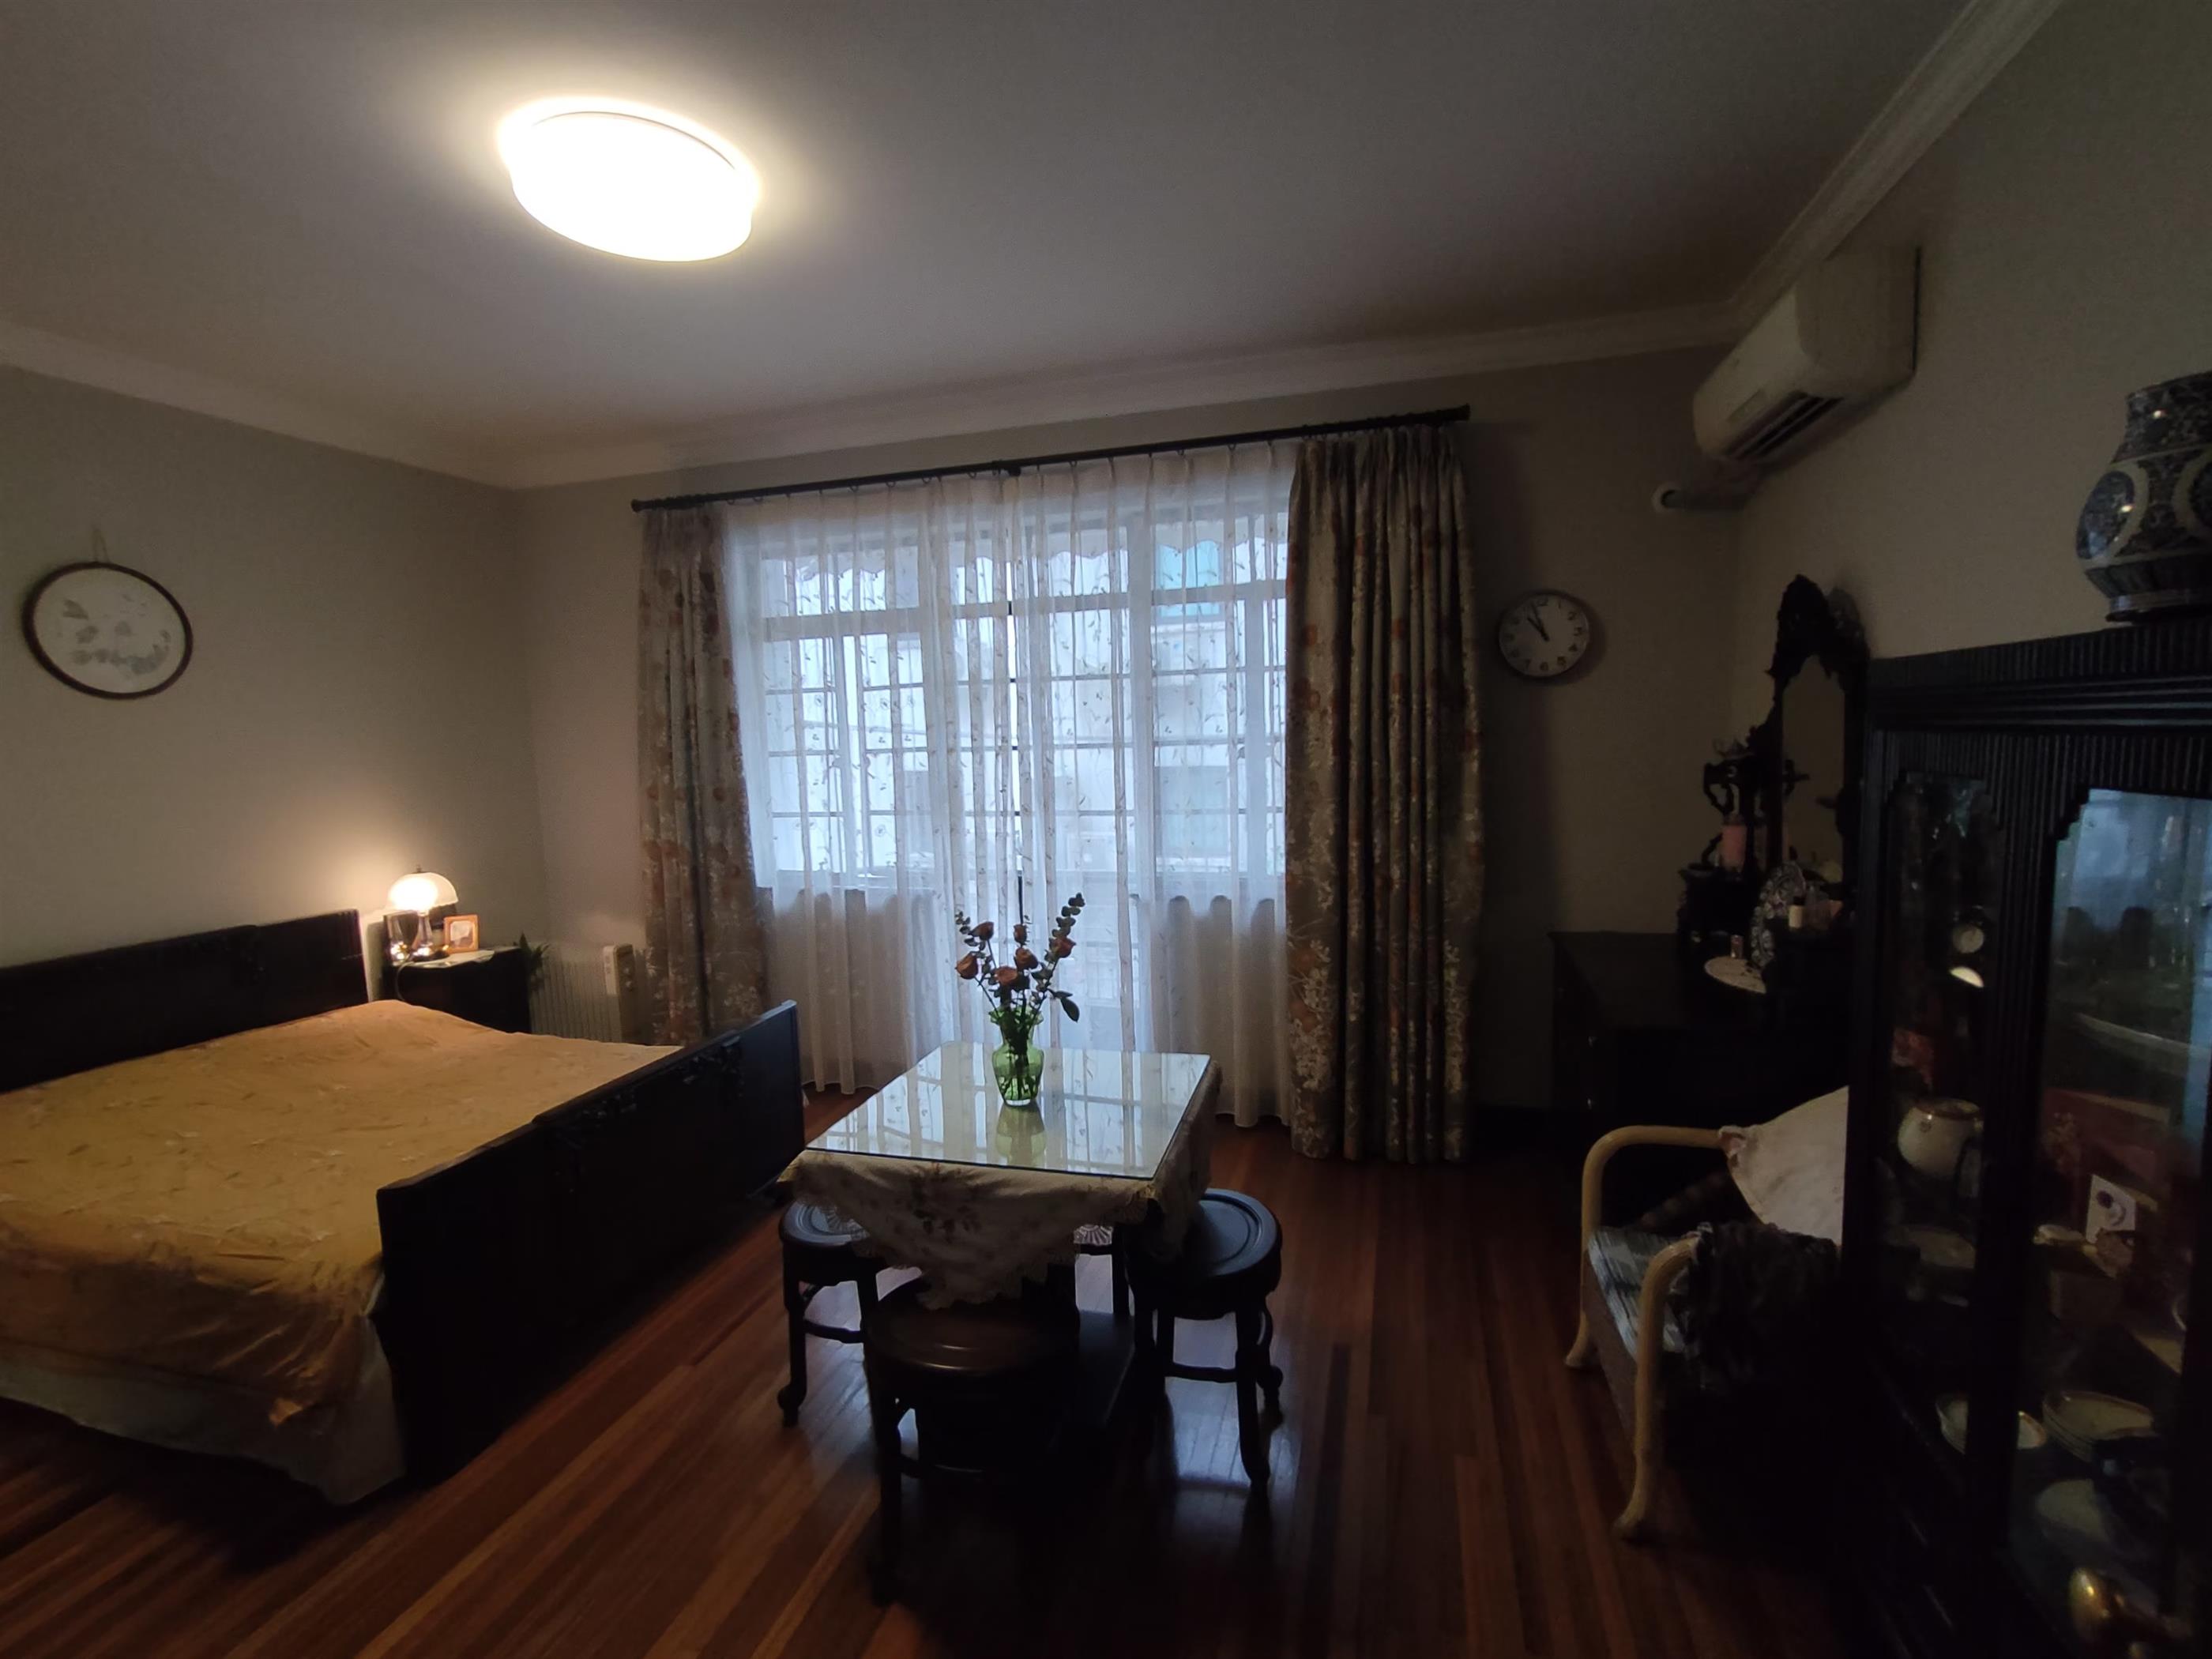 another bedroom *** For Sale *** 3-Floor 5-Room Nanjing W Rd Lane House in Shanghai